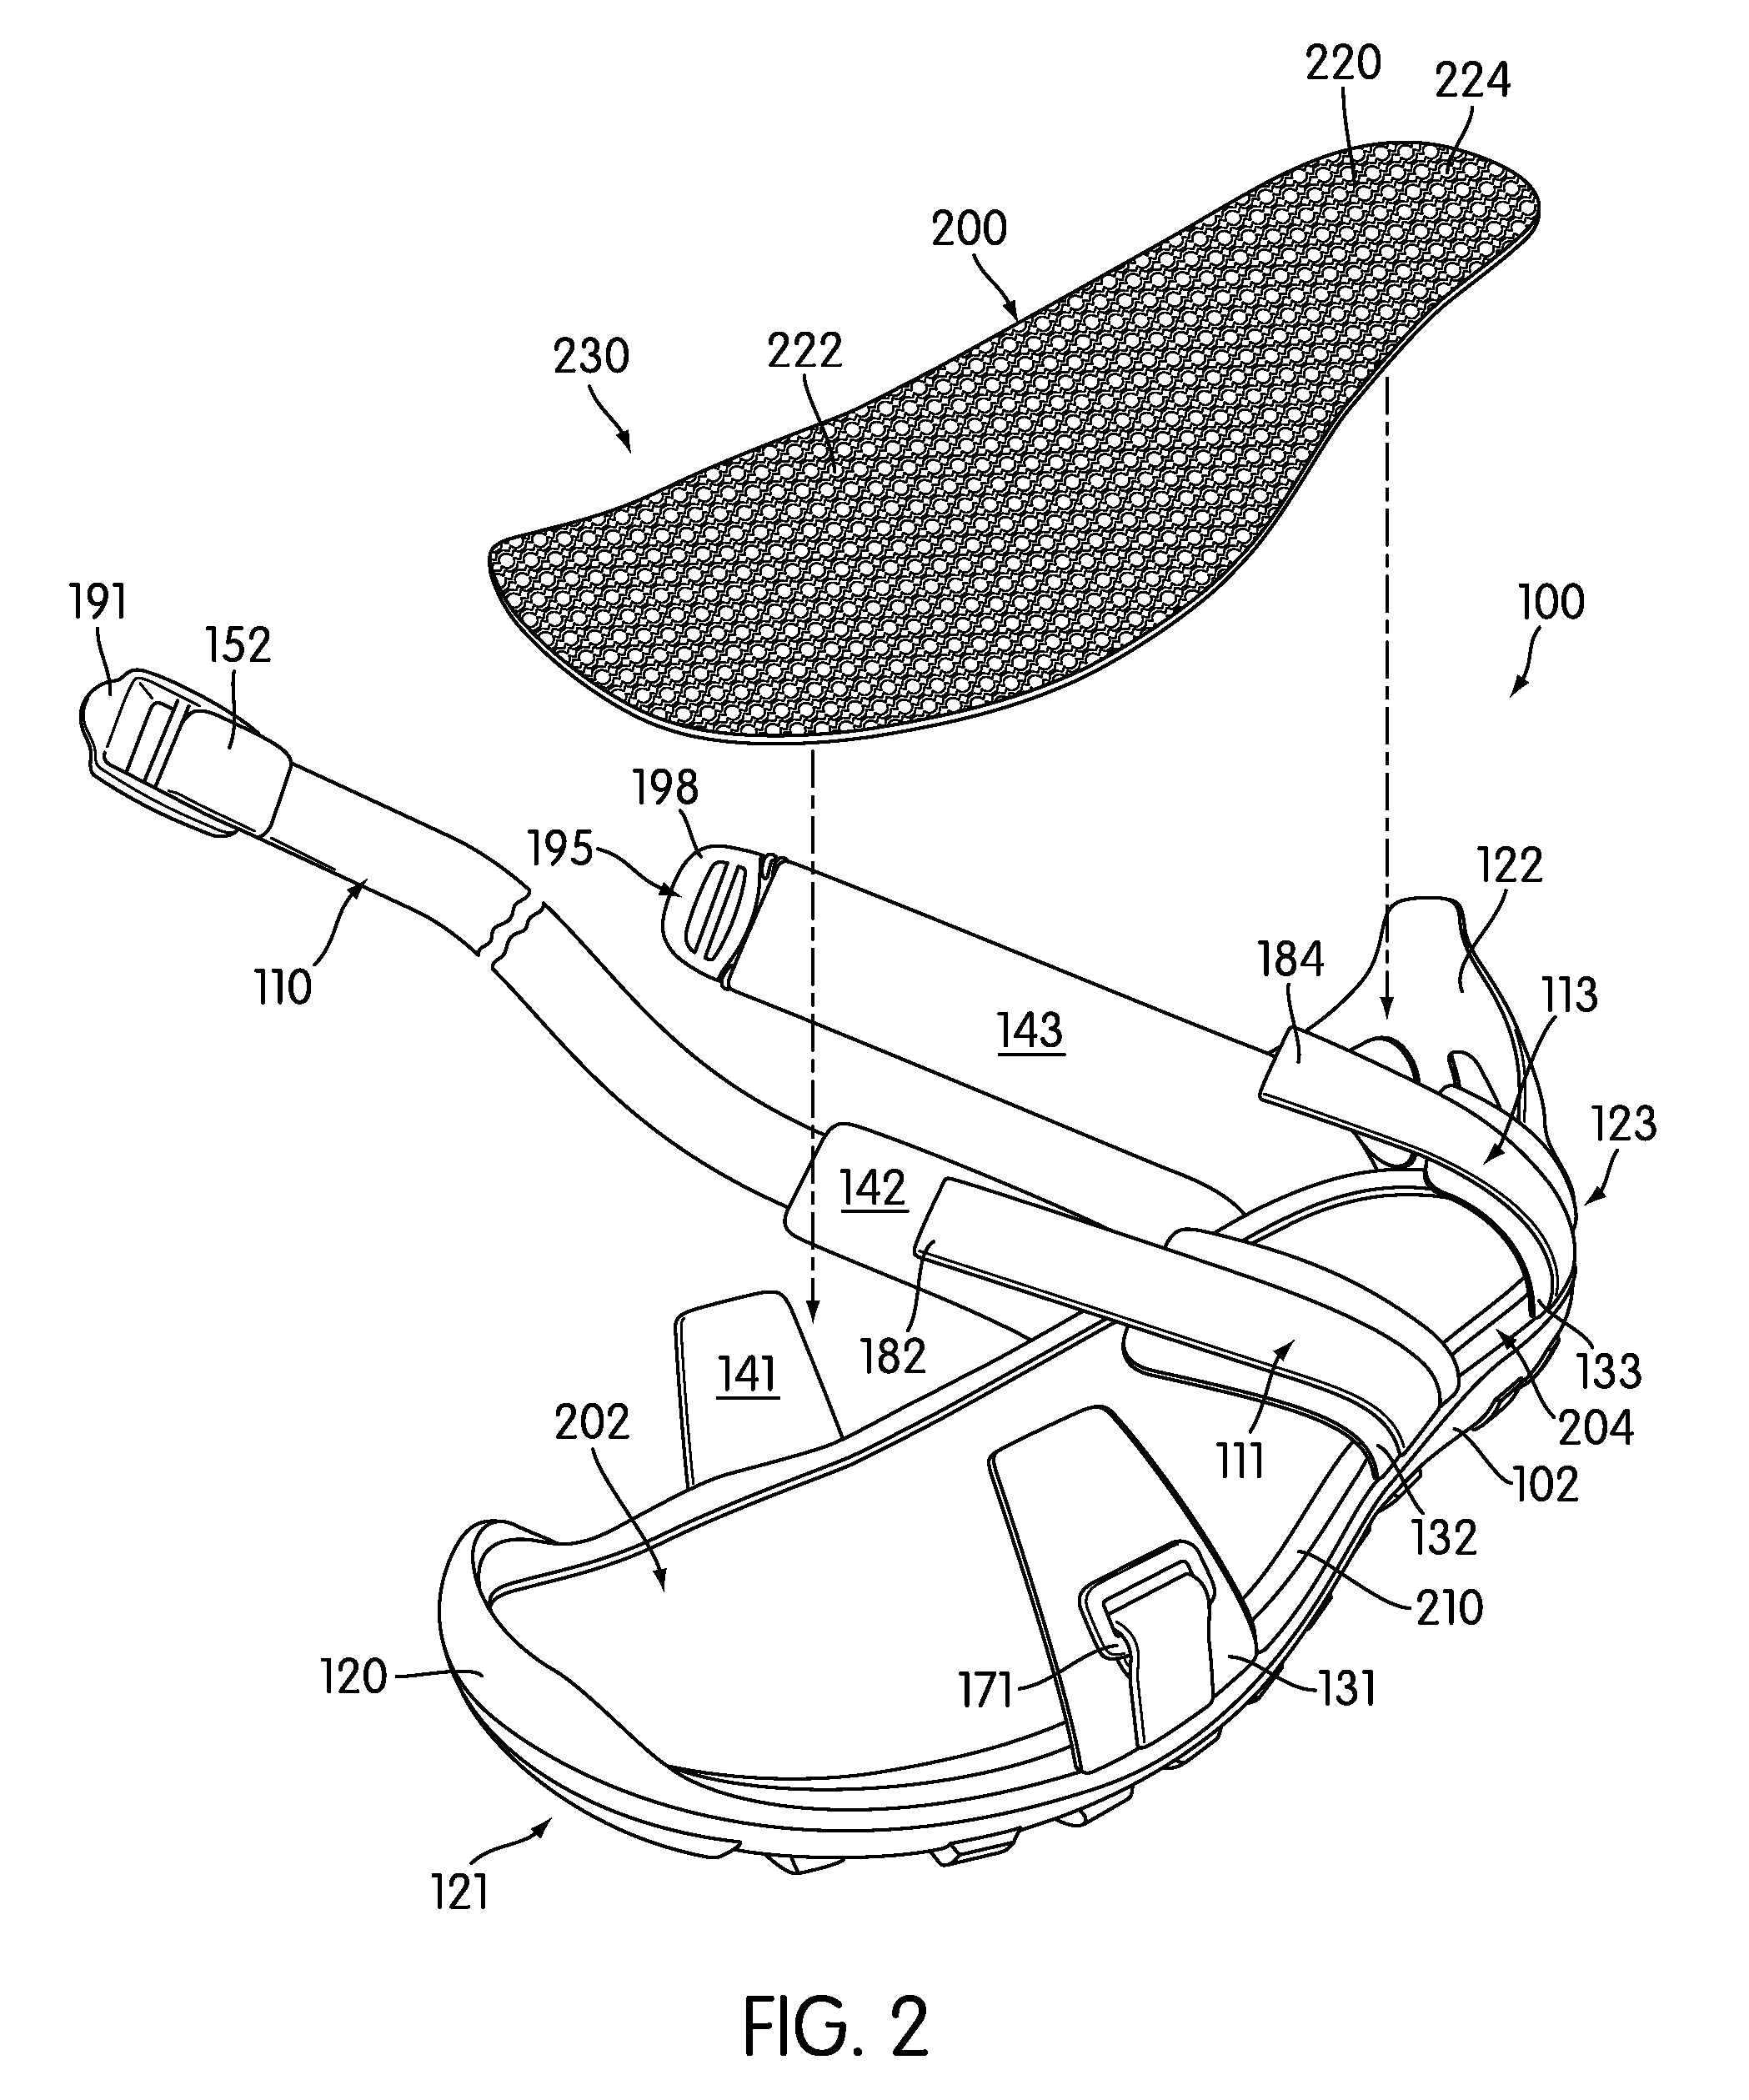 Article of footwear with mesh on outsole and insert